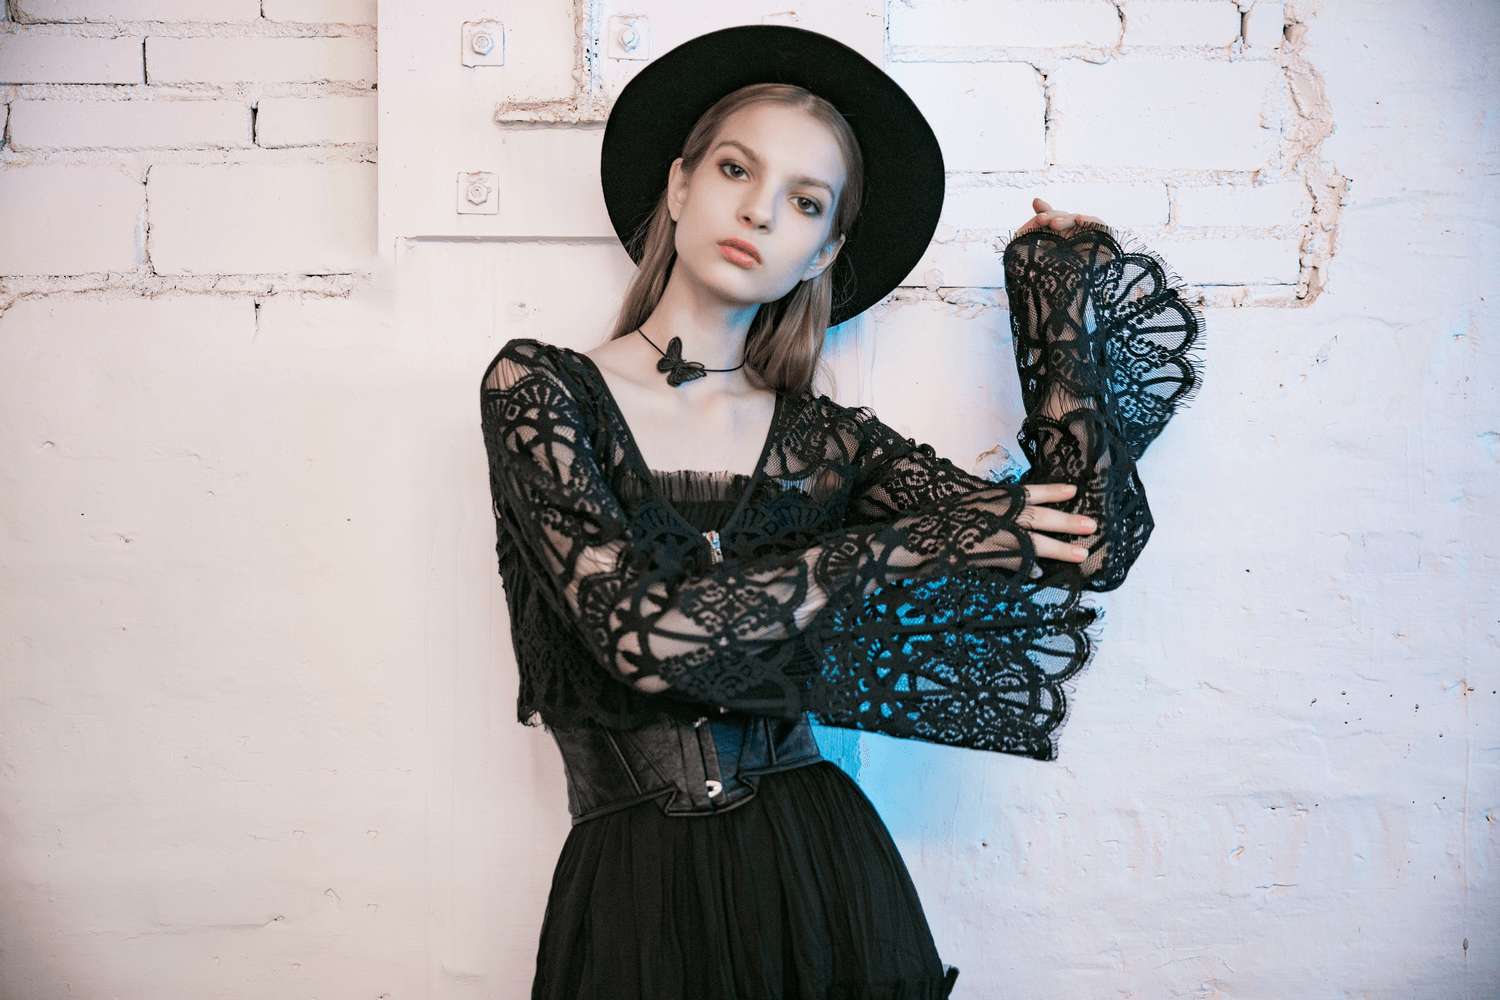 Gothic Women's Lace Crop Top with Bell Sleeves